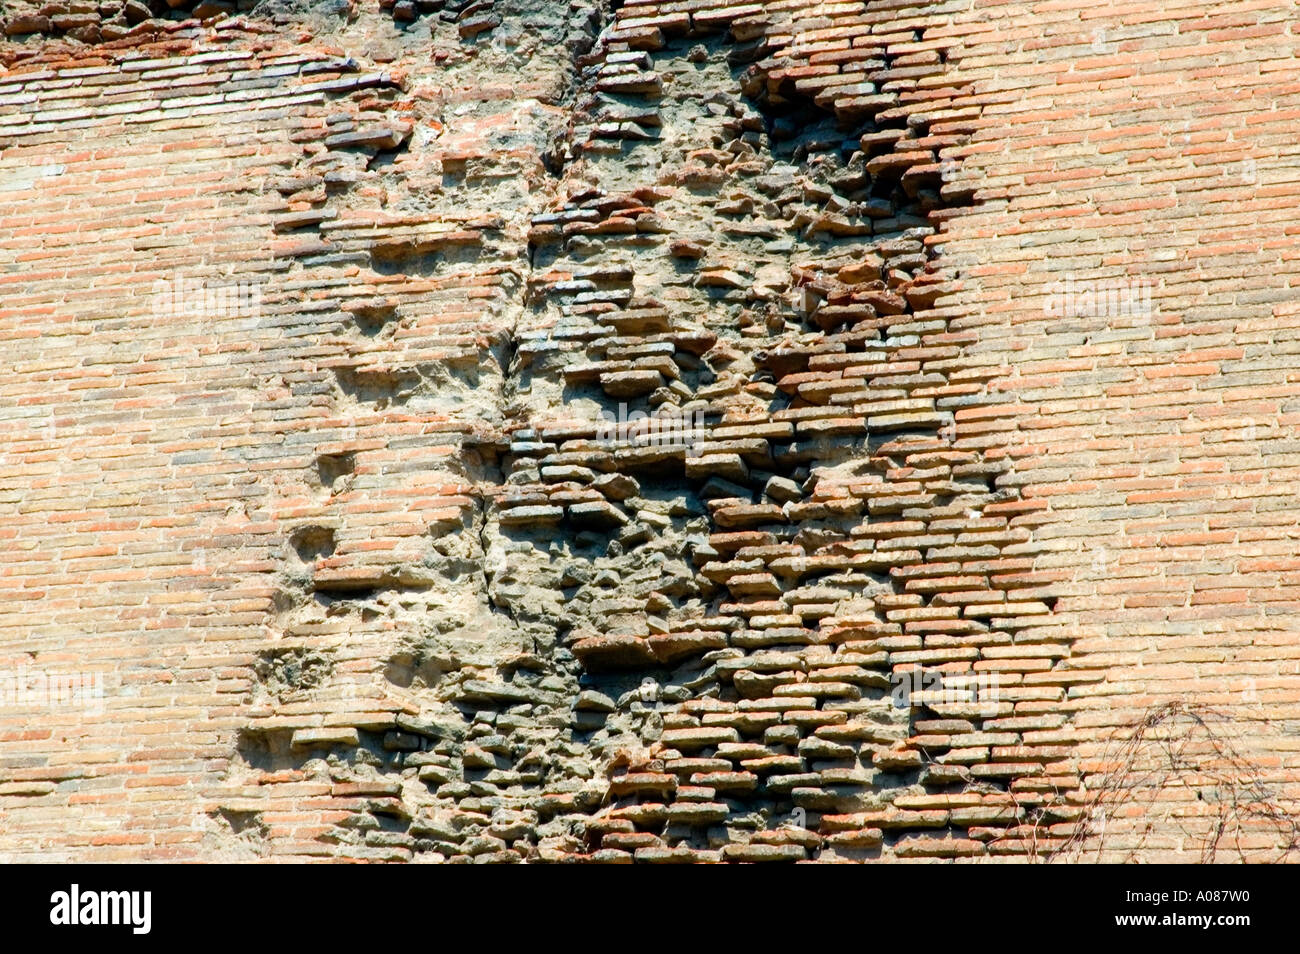 Detail of decaying bricks, water damage, Red Hall (Kizil avlu), or Red Mosque, Bergama, Turkey. DSC 6962 Stock Photo